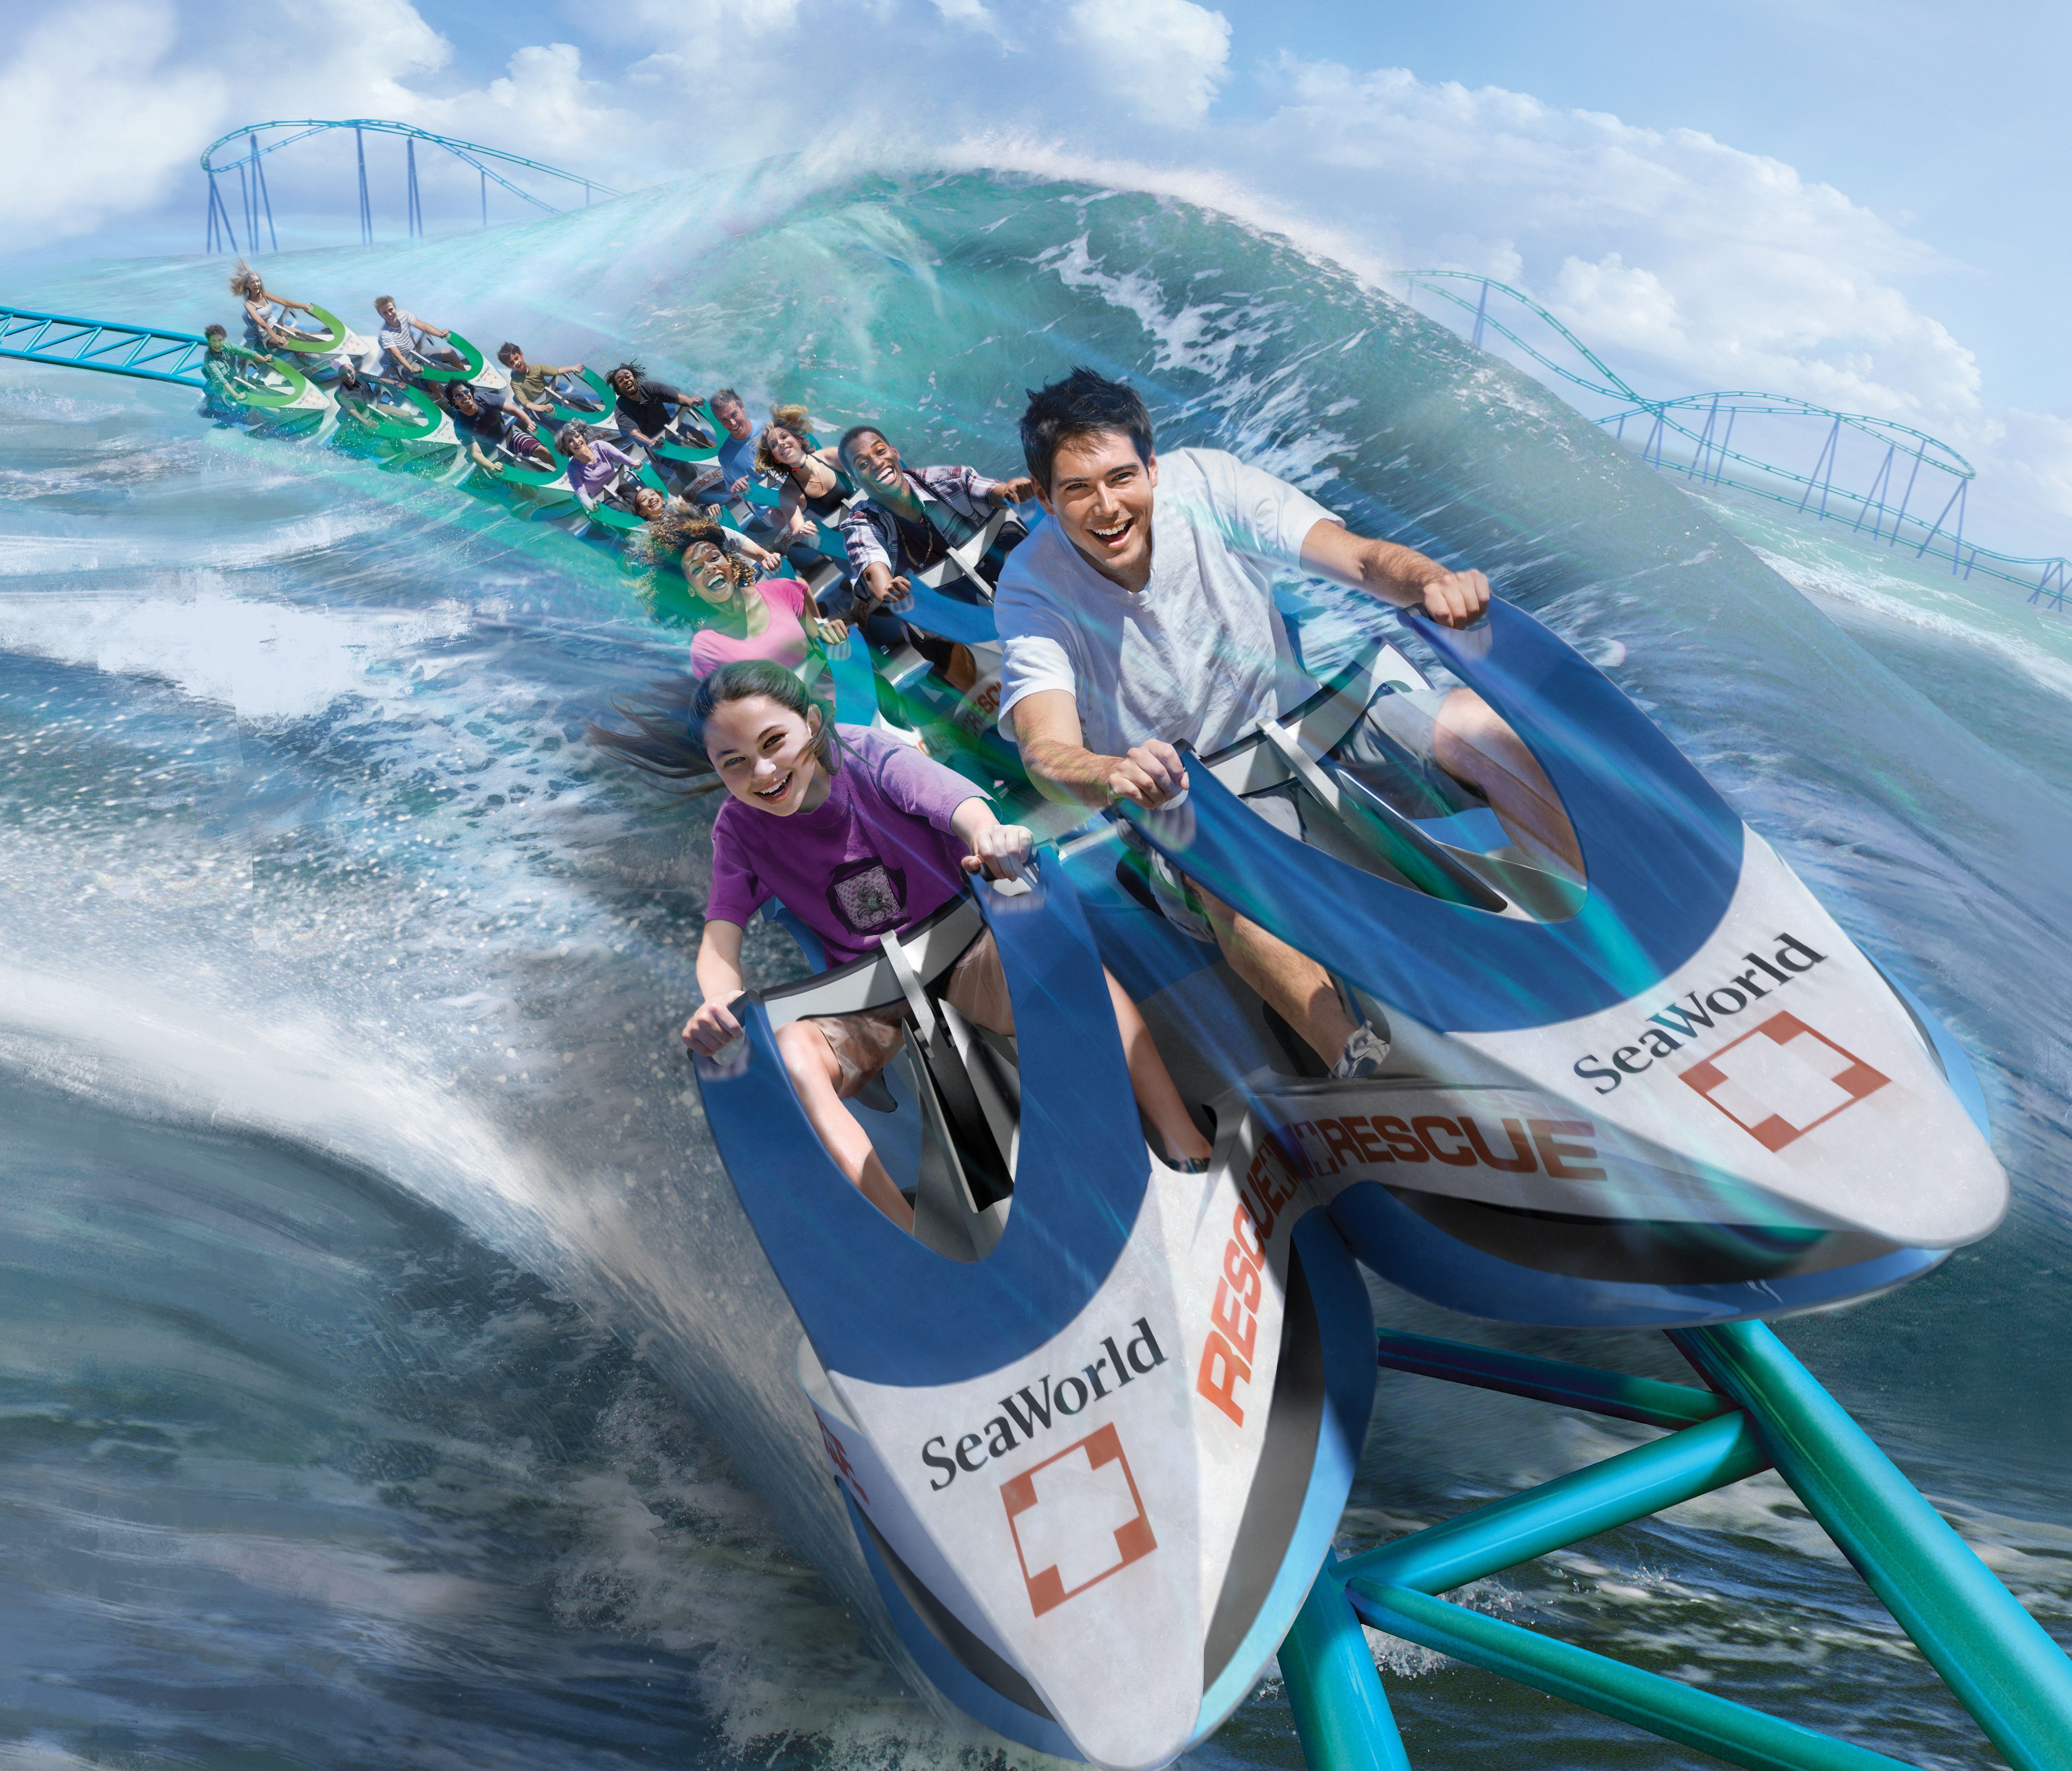 SeaWorld's San Antonio park will roll out Wave Breaker: The Rescue Coaster. Capitalizing on Sea Rescue, the ABC TV show produced in collaboration with SeaWorld, the coaster train will feature cars that look like the Jet Skis used on the program.